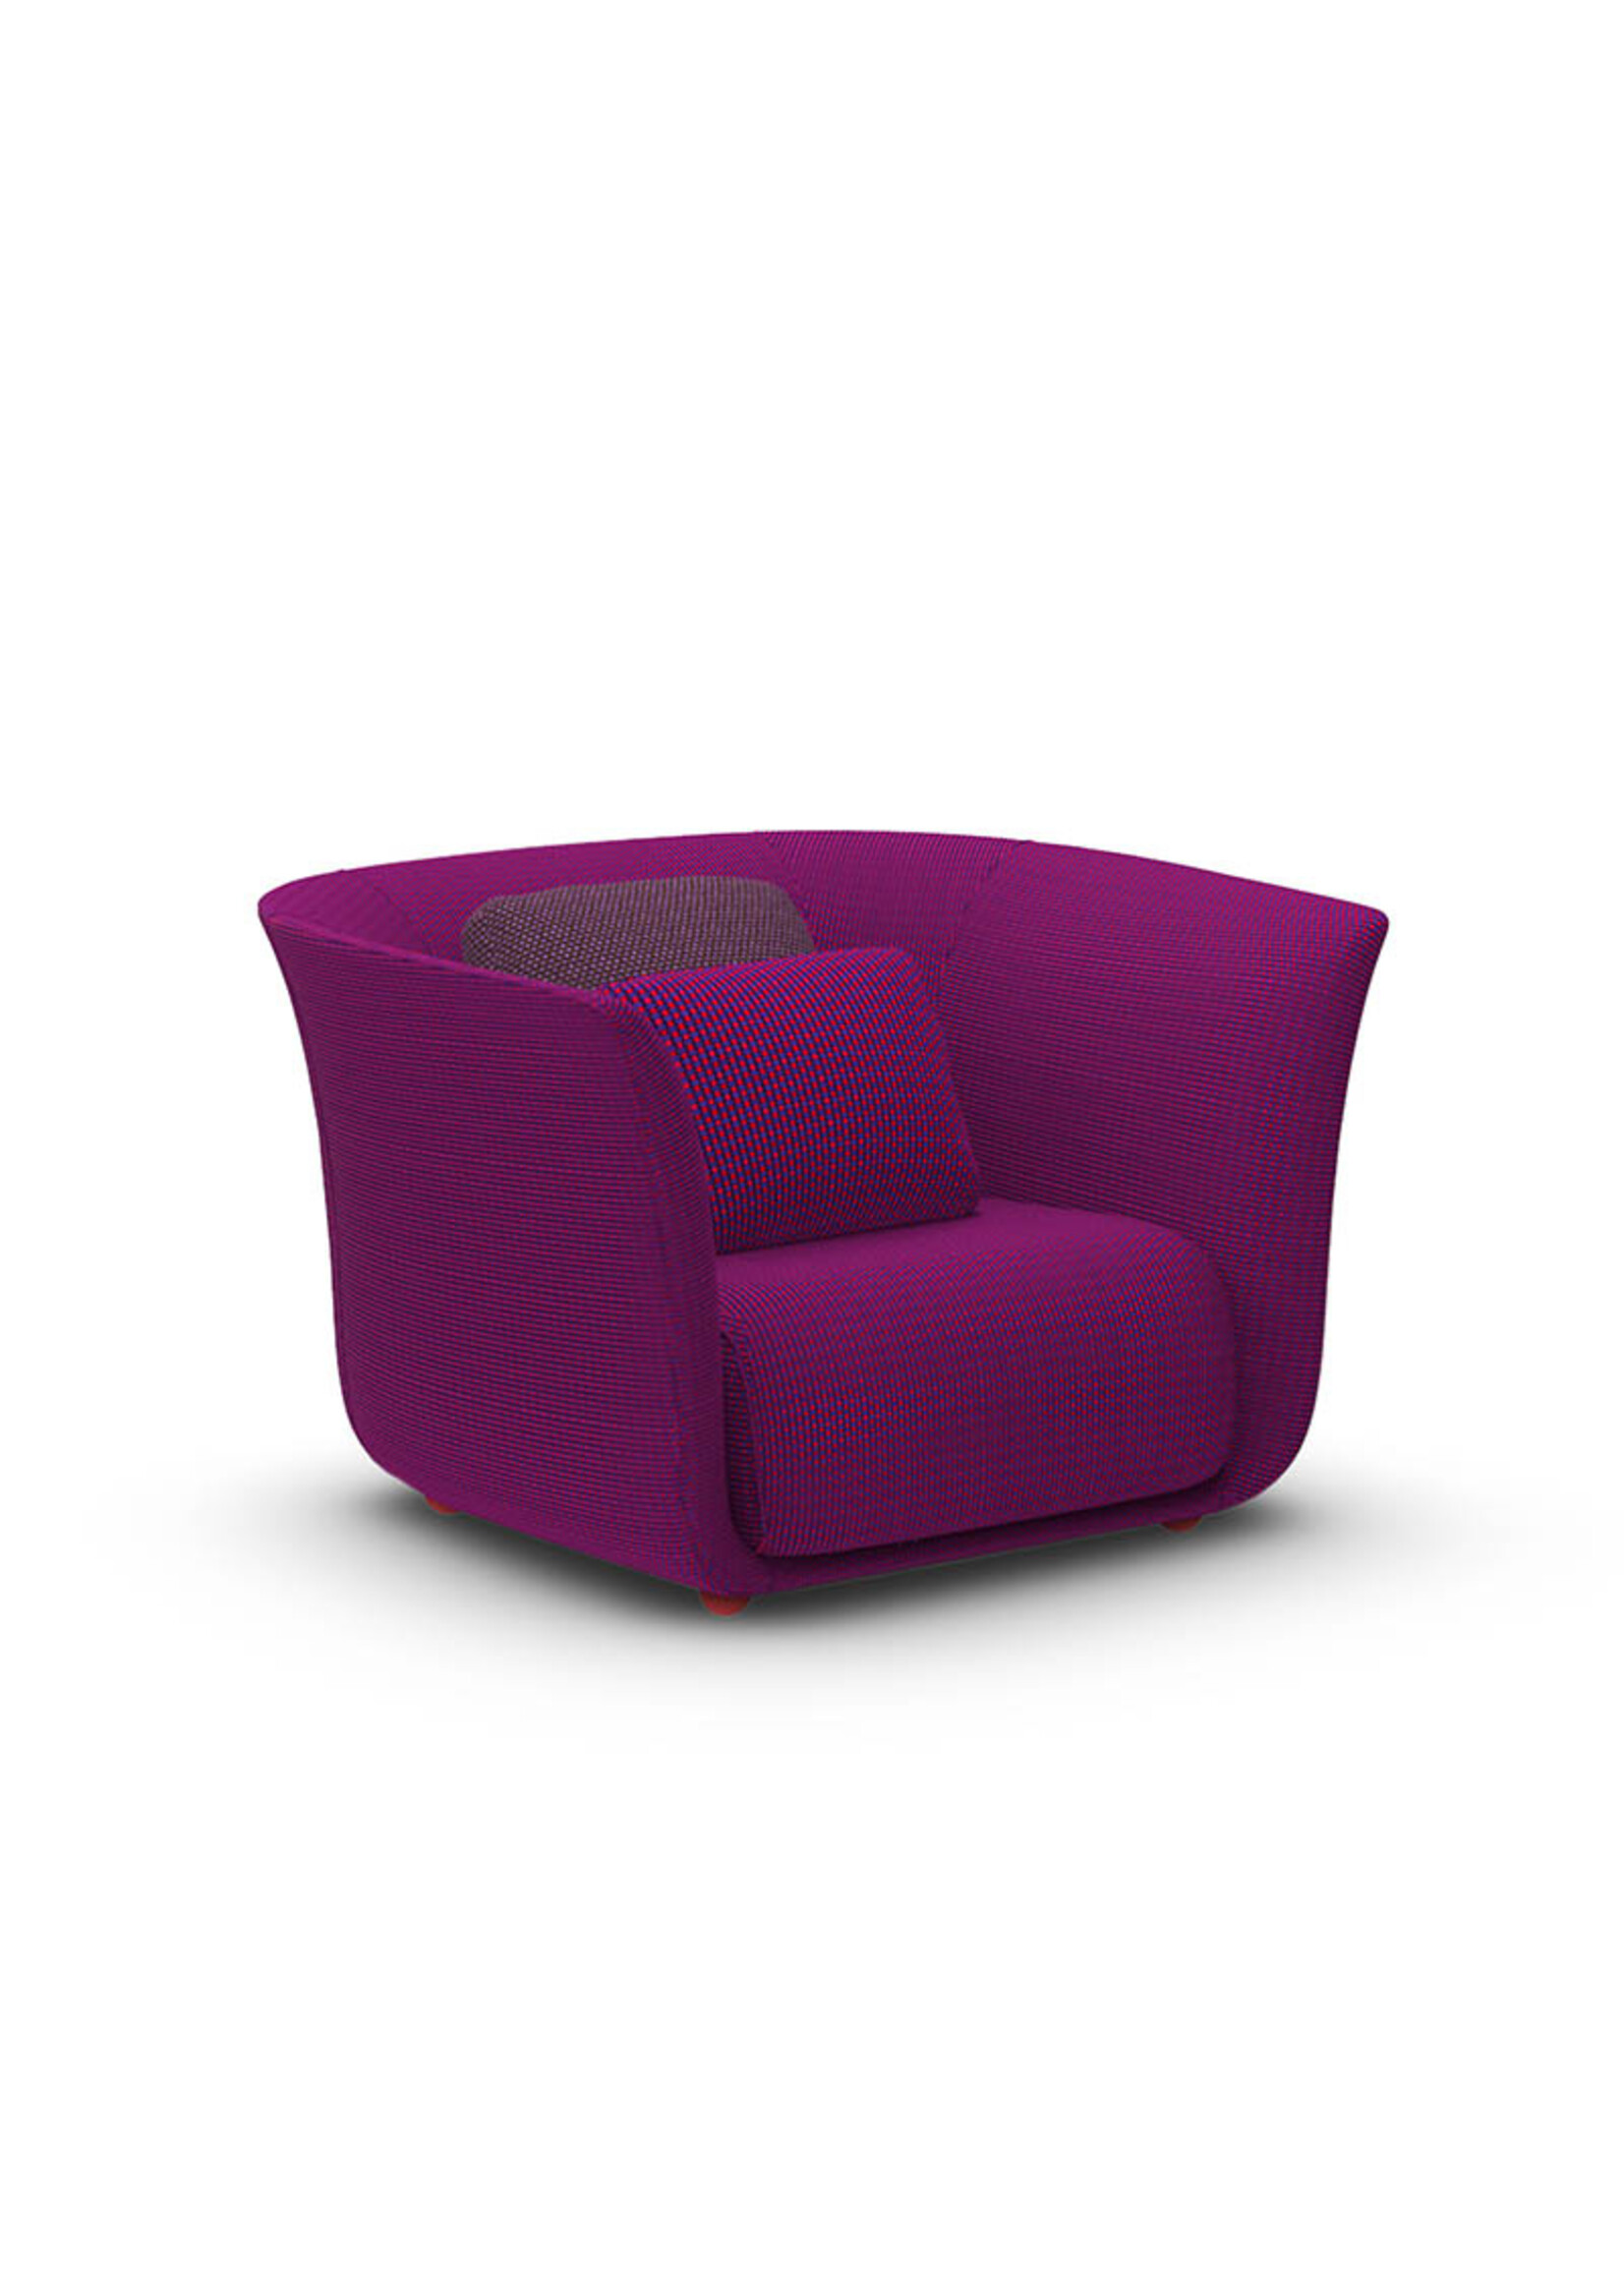 SUAVE LOUNGE CHAIR by Marcel Wanders